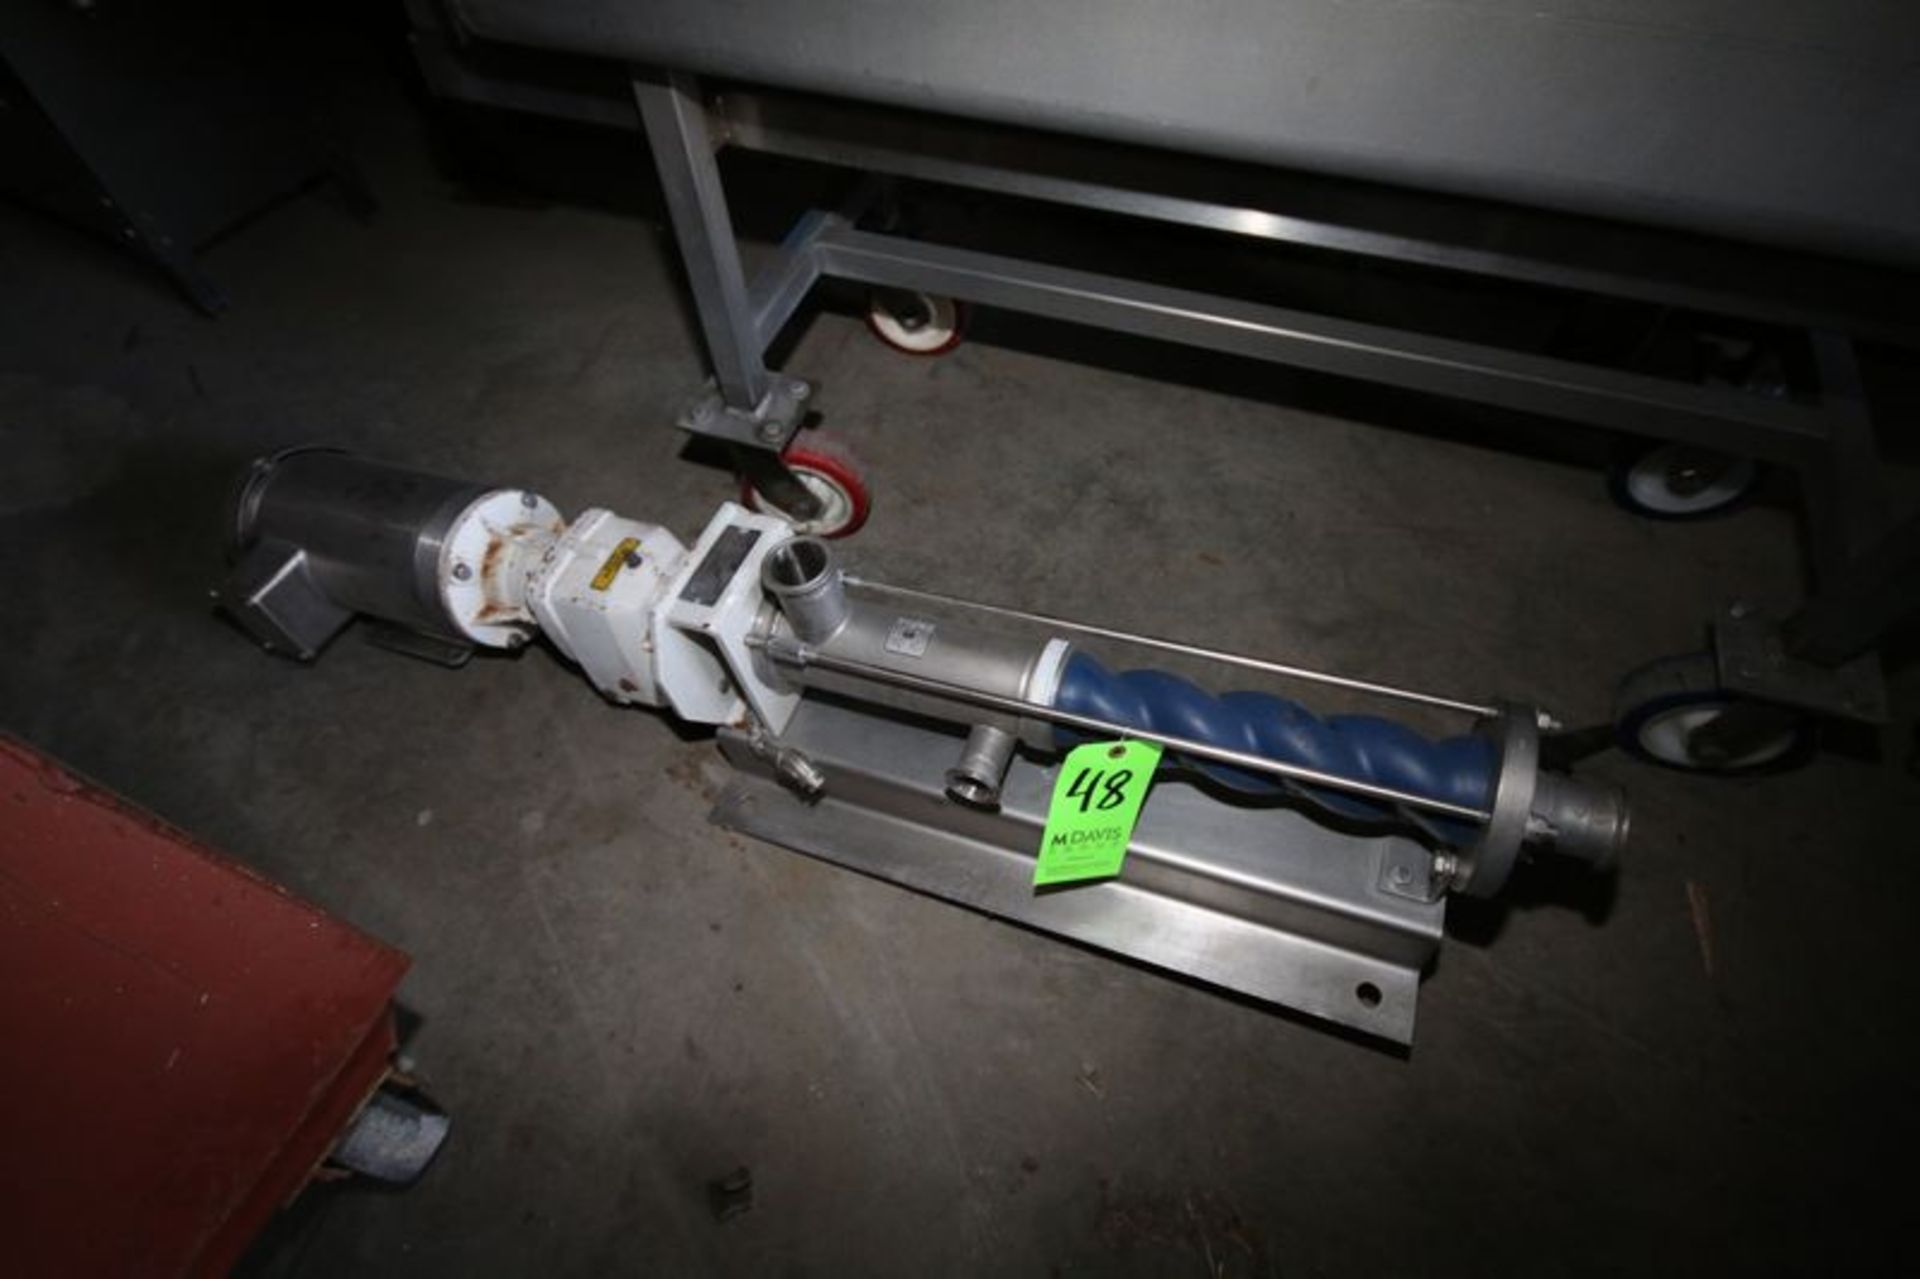 Seepex Progressive Cavity Pump. Range BCS0. Commission # 8150232. 2" Clamp Type Inlet and Outlet.